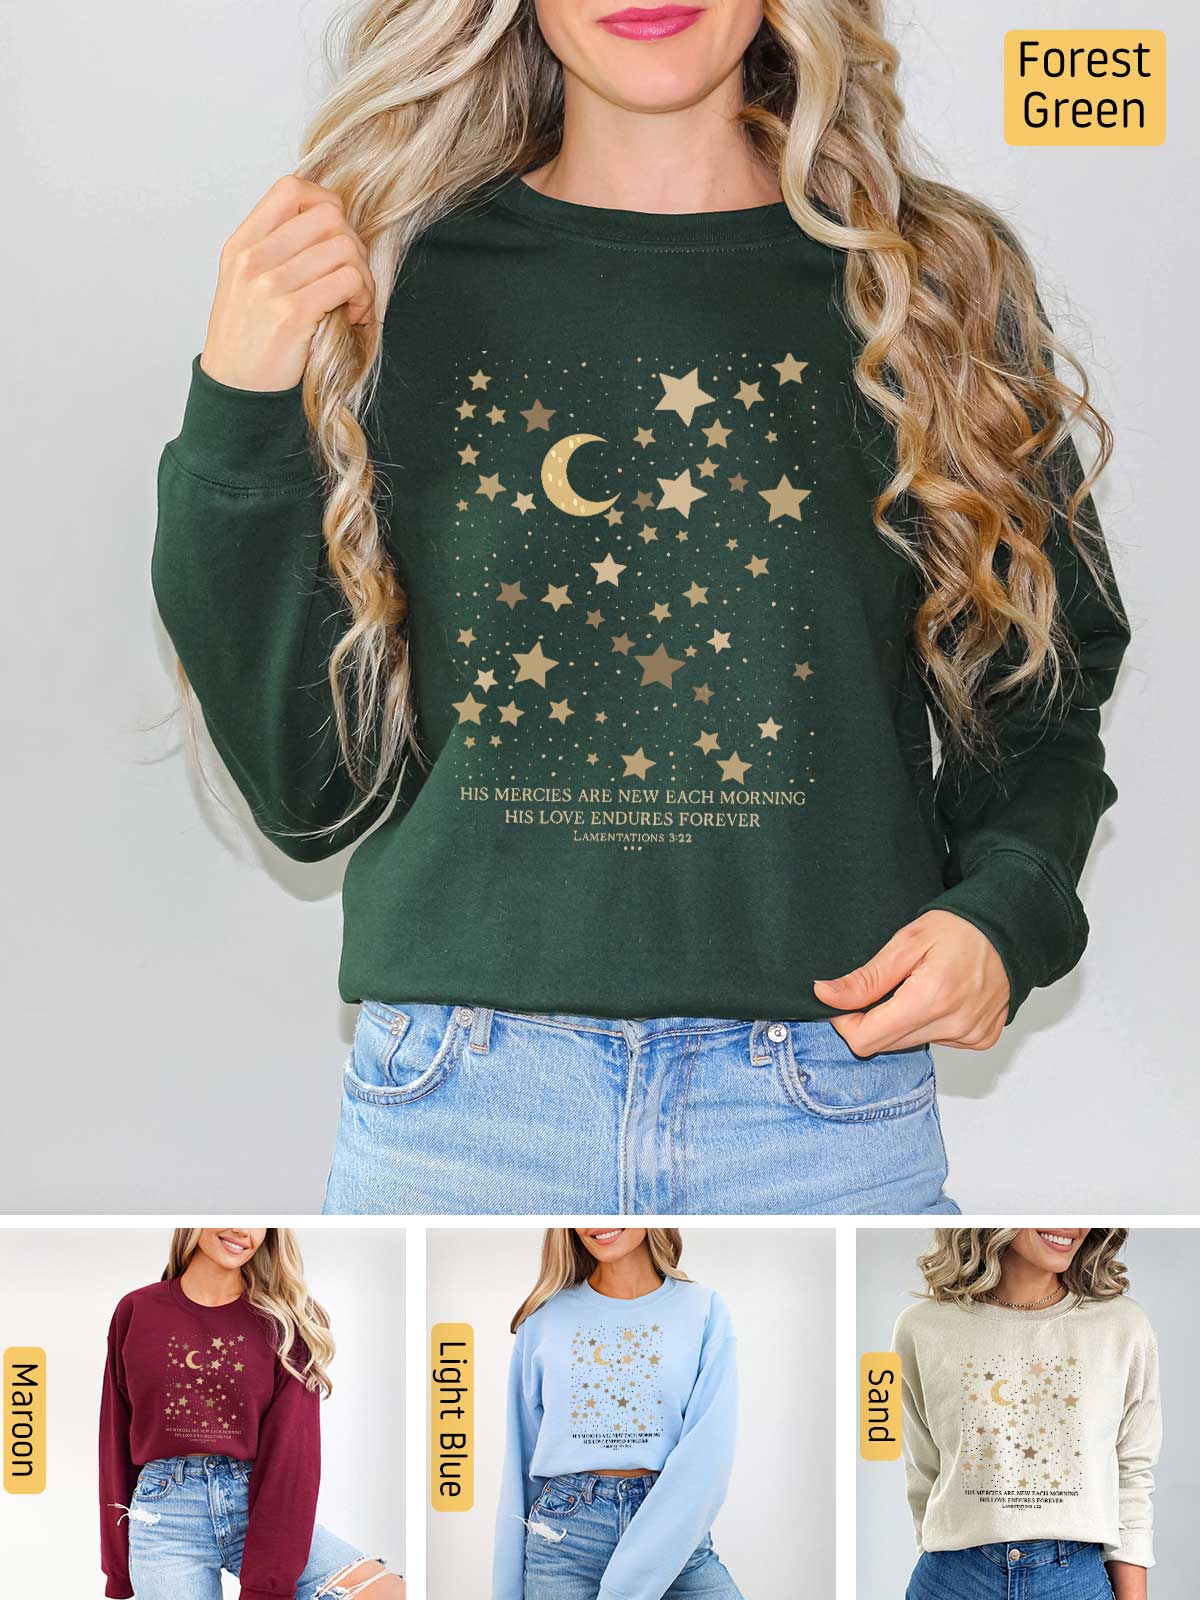 a woman wearing a green sweater with stars and moon on it